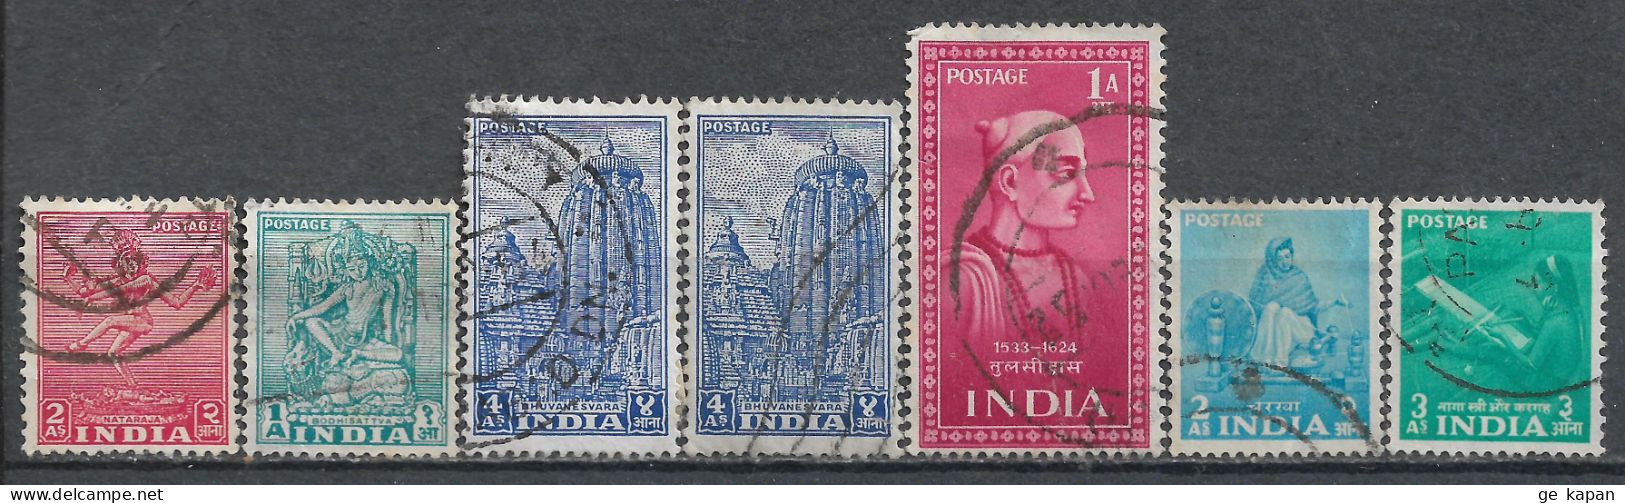 1949-1955 INDIA Set Of 7 Used Stamps (Michel # 195,215,217,222,242,243) - Usados